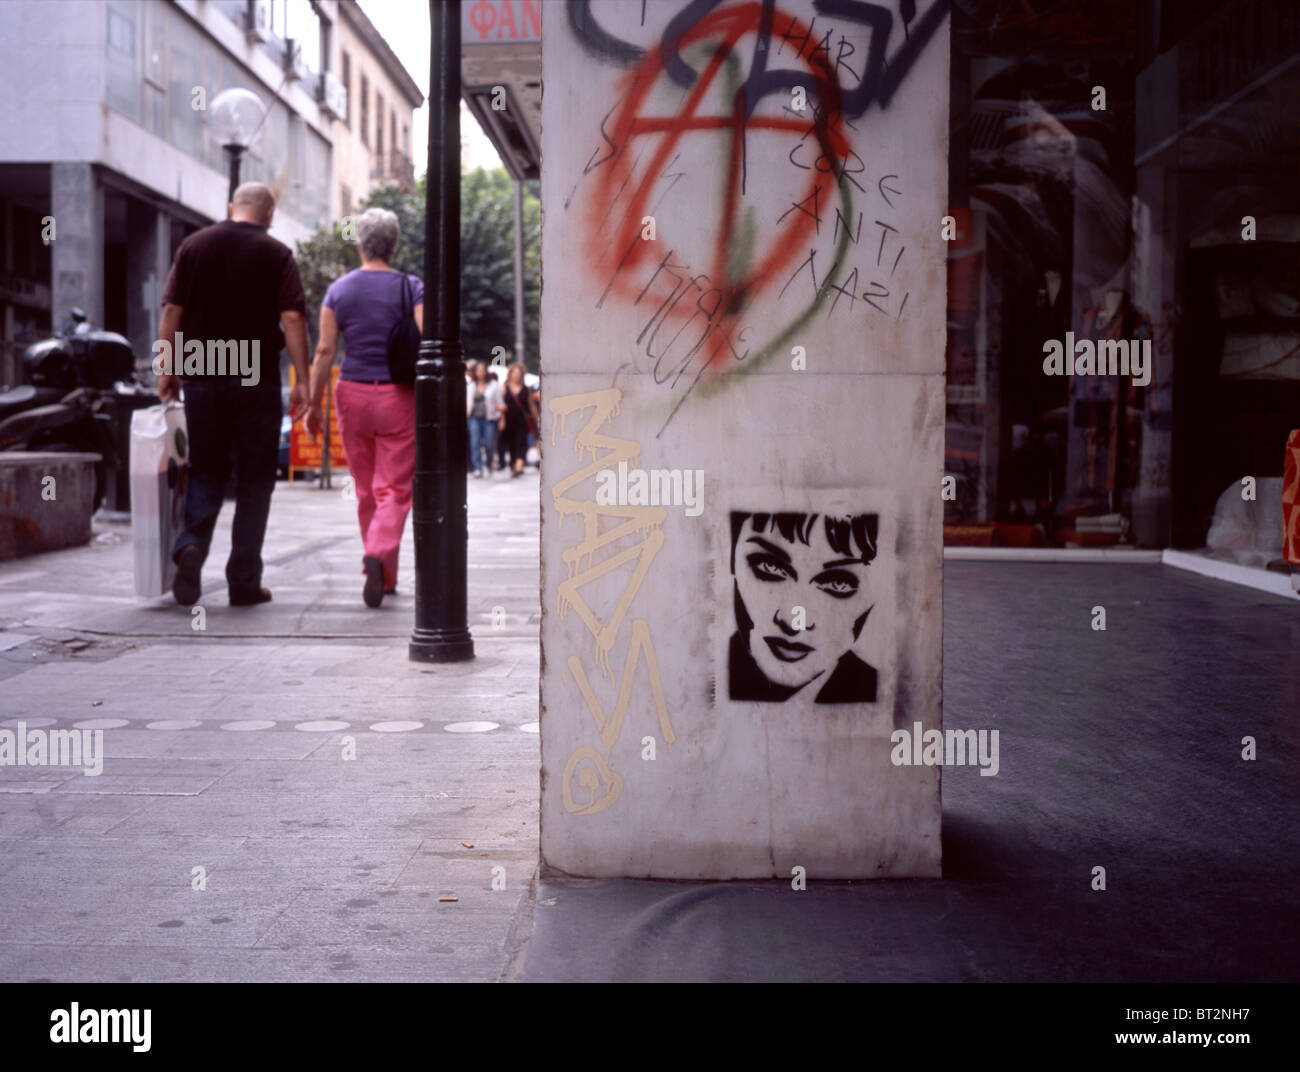 Graffiti / Stencil showing the face of a woman on a column in a pedestrian street in Athens, Greece Stock Photo